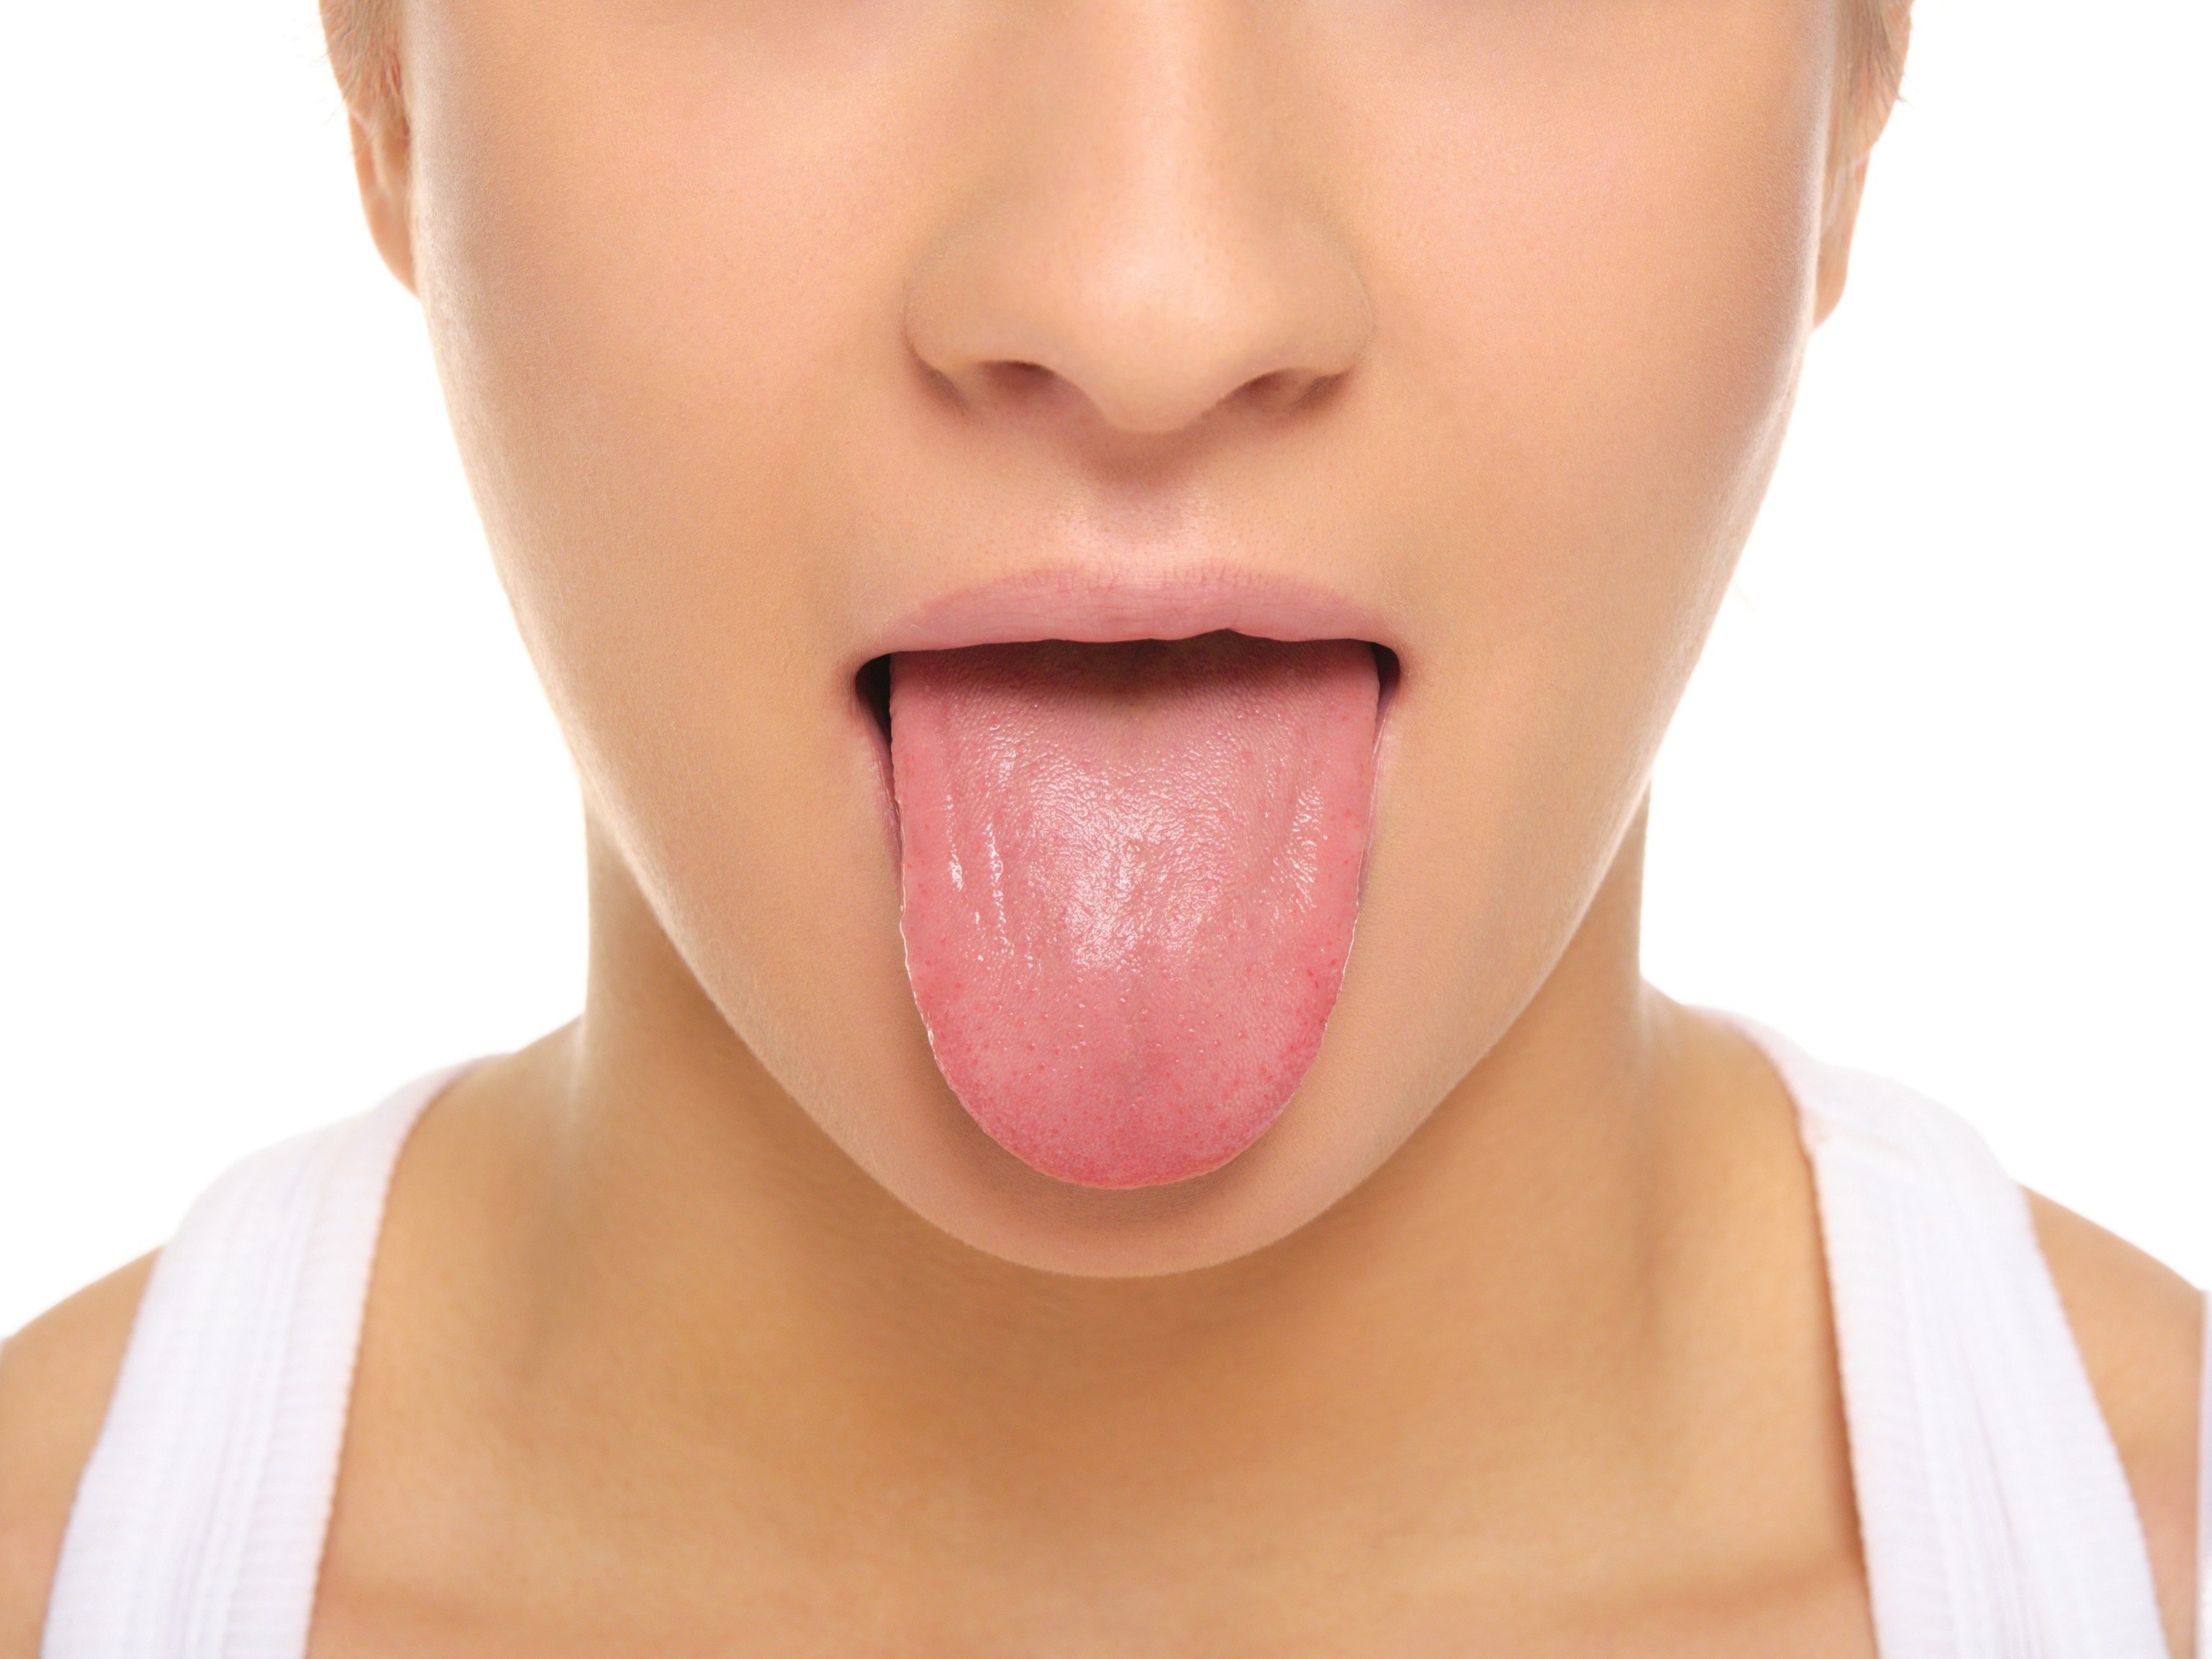 What causes dry mouth?